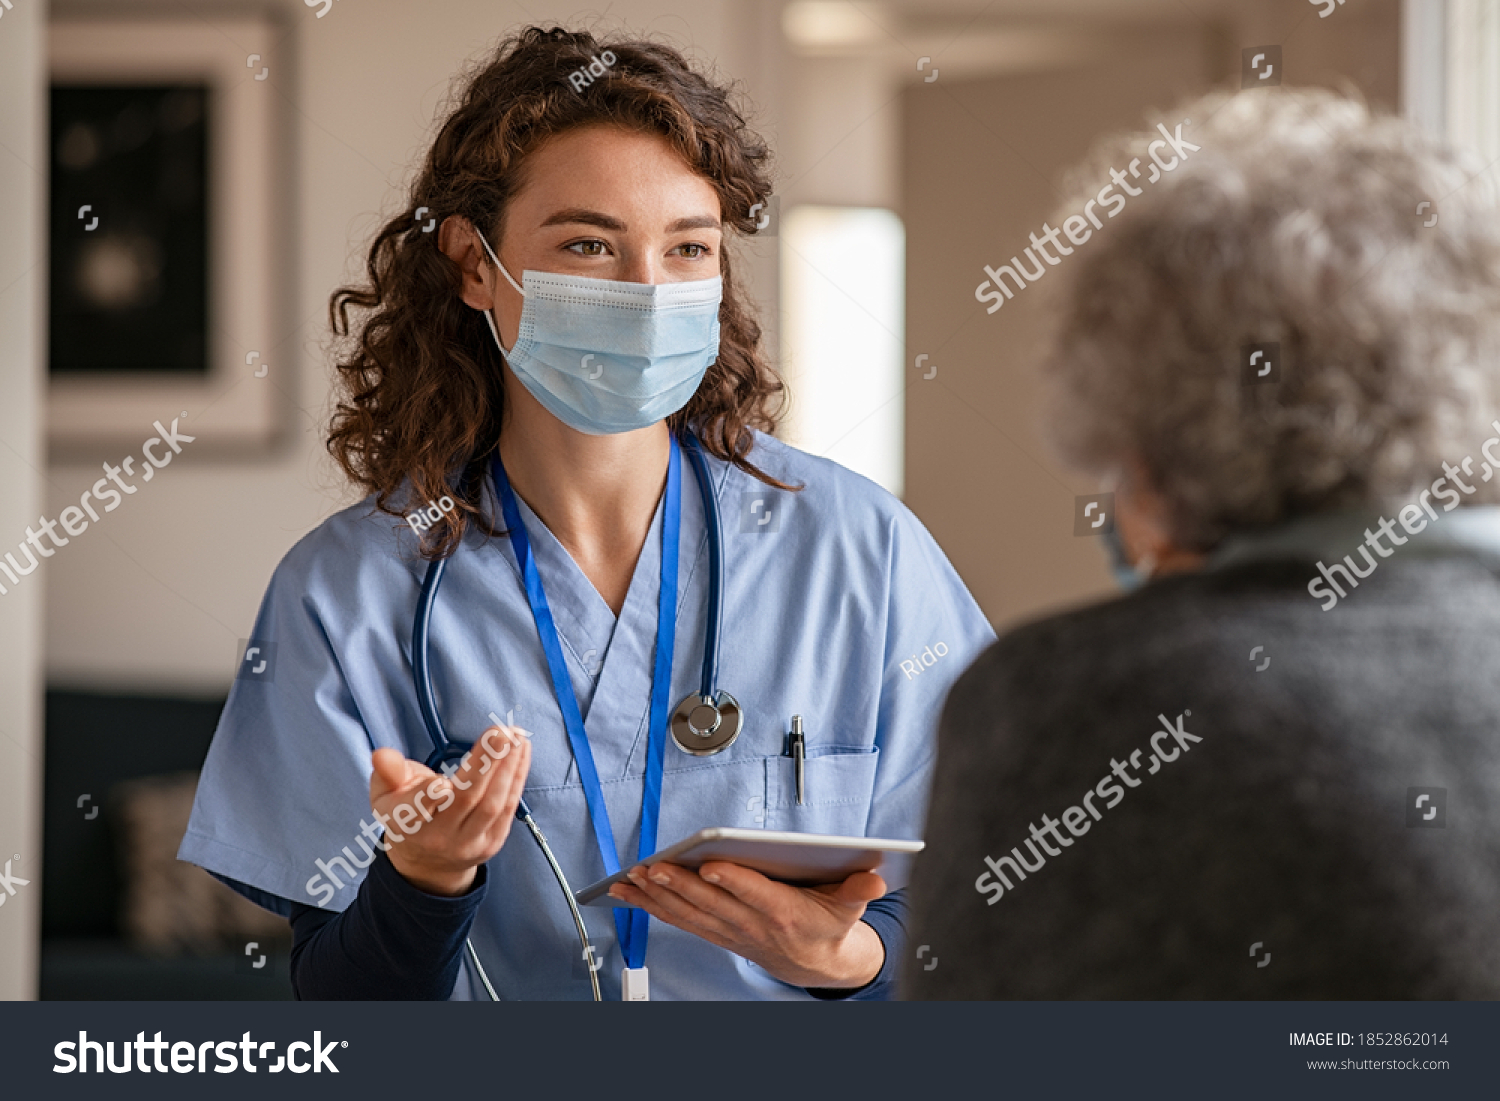 Doctor wearing safety protective mask supporting and cheering up senior patient during home visit during covid-19 pandemic. Nurse and old woman wearing facemasks during coronavirus and flu outbreak.  #1852862014